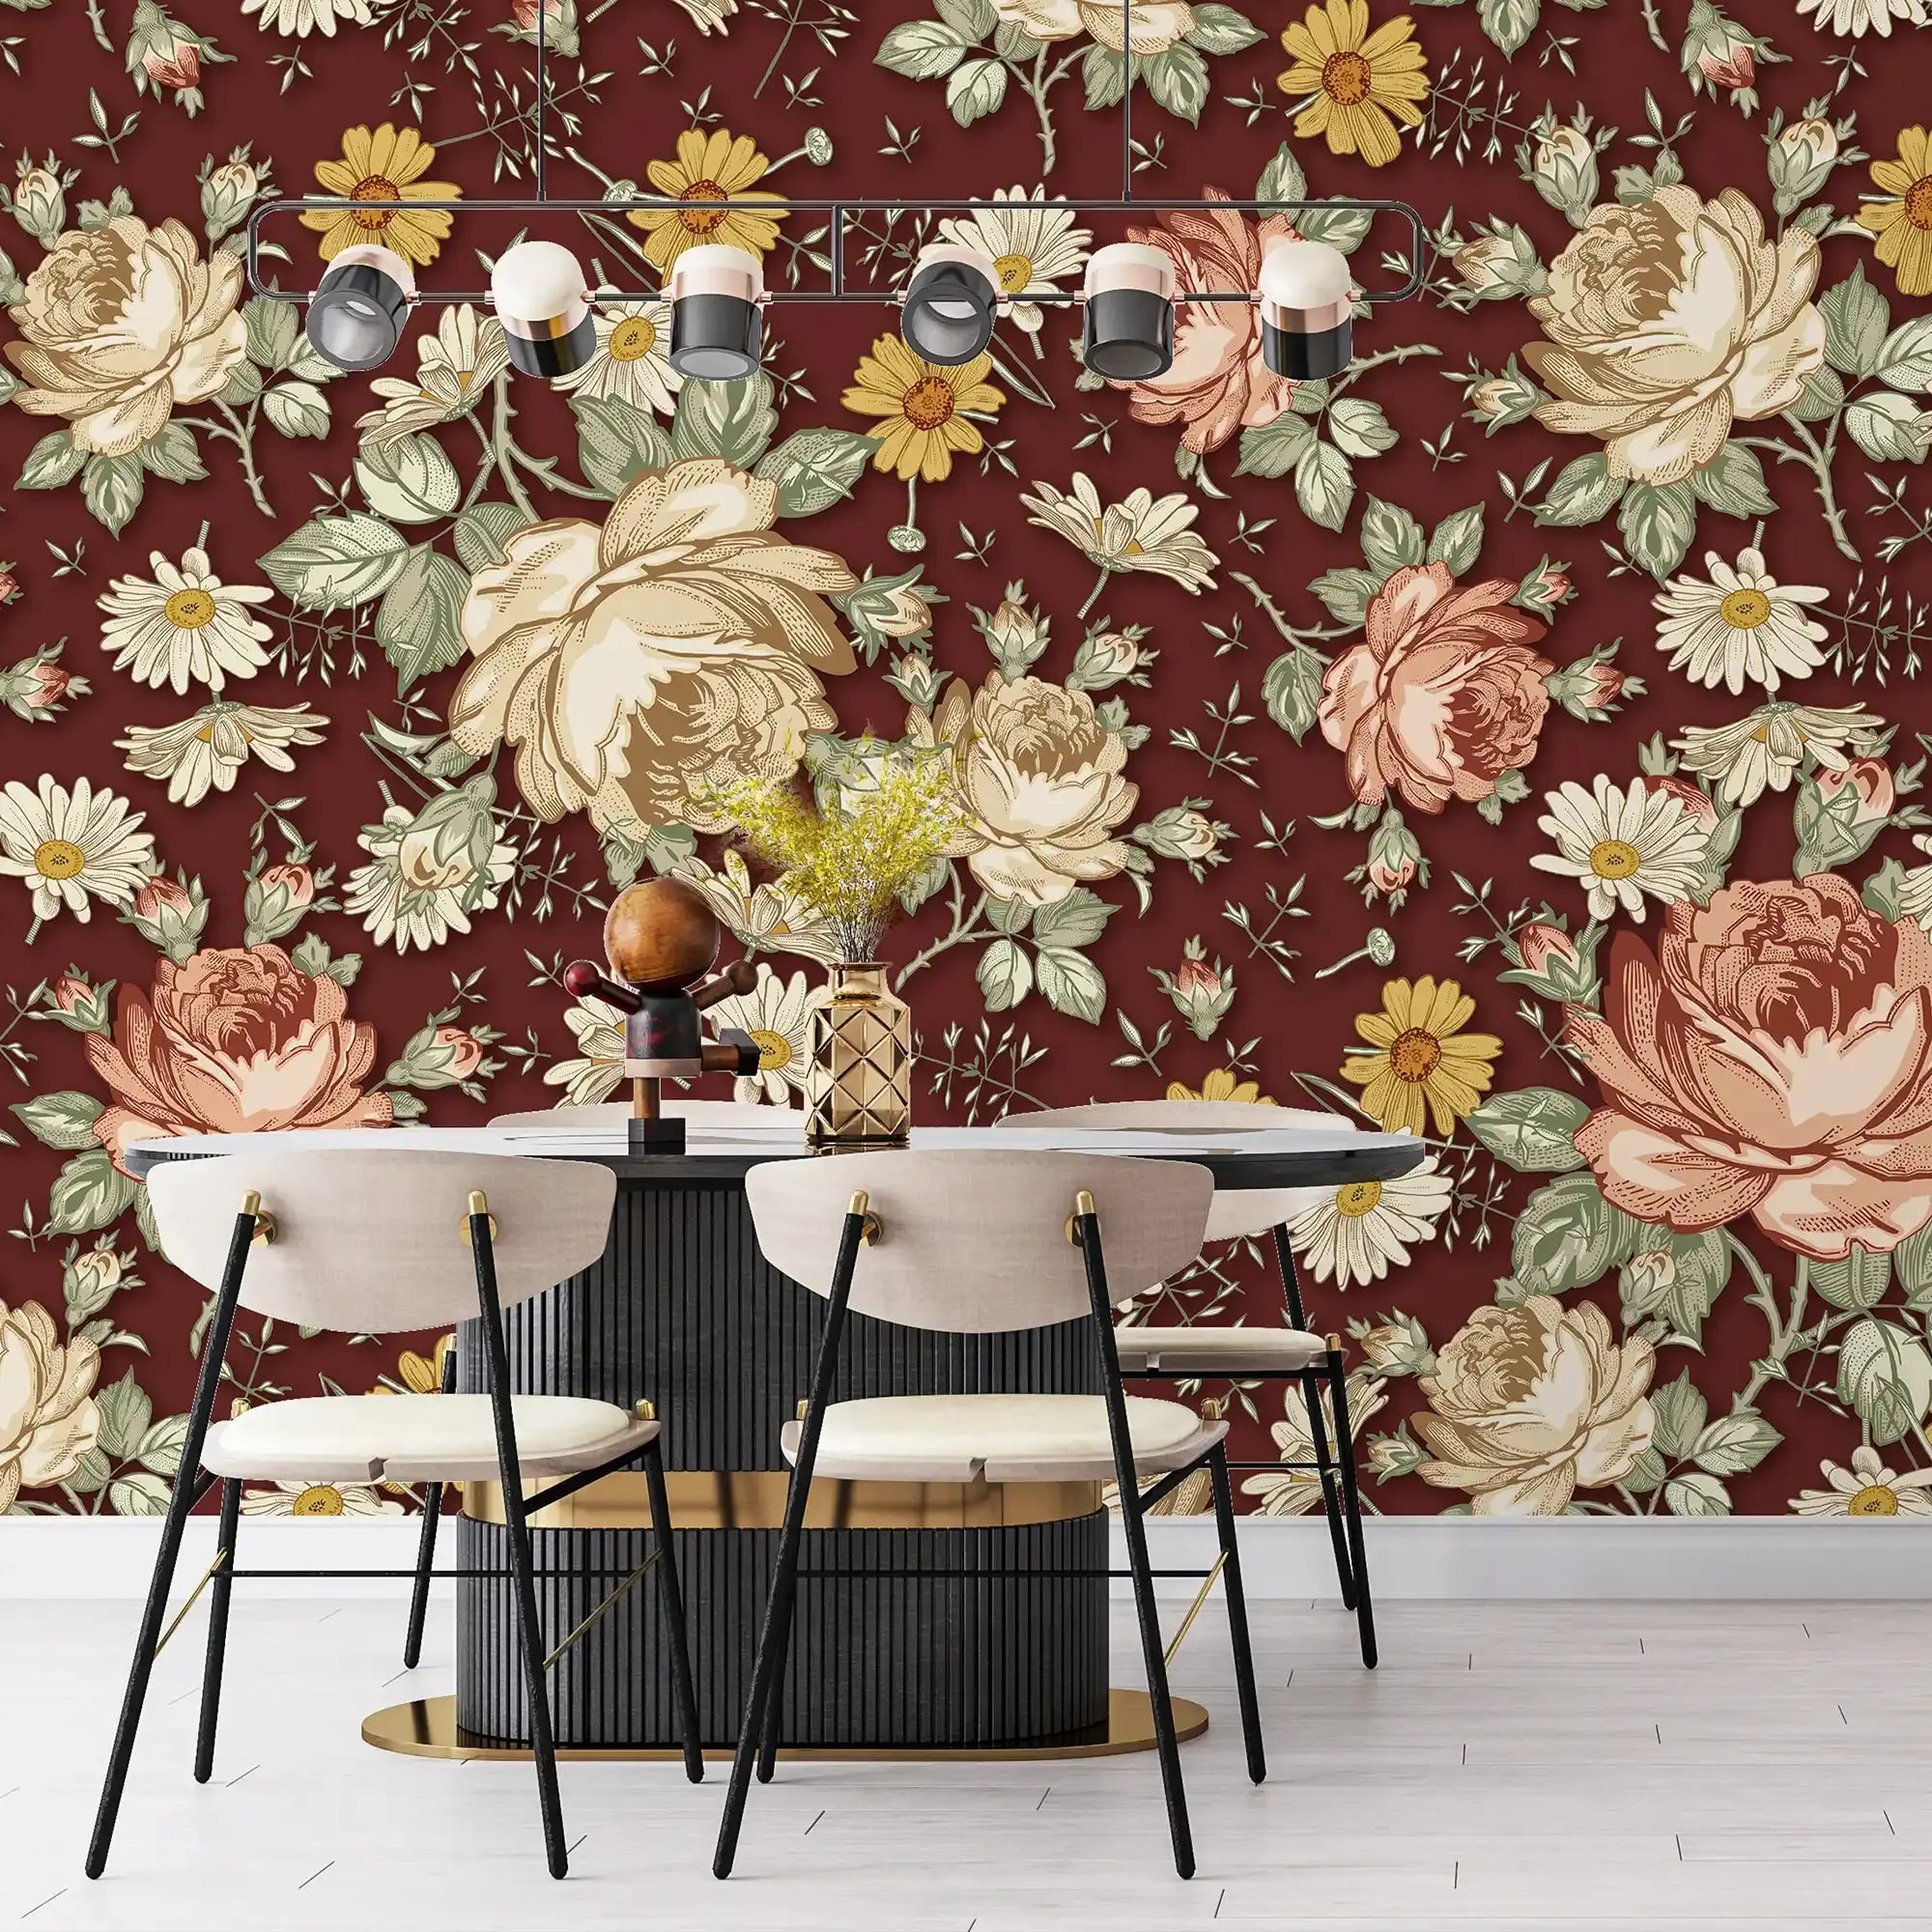 3097-B / Removable Wallpaper Peel and Stick, Floral & Geometric Pattern Wallpaper with Daisies for Room Decor - Artevella